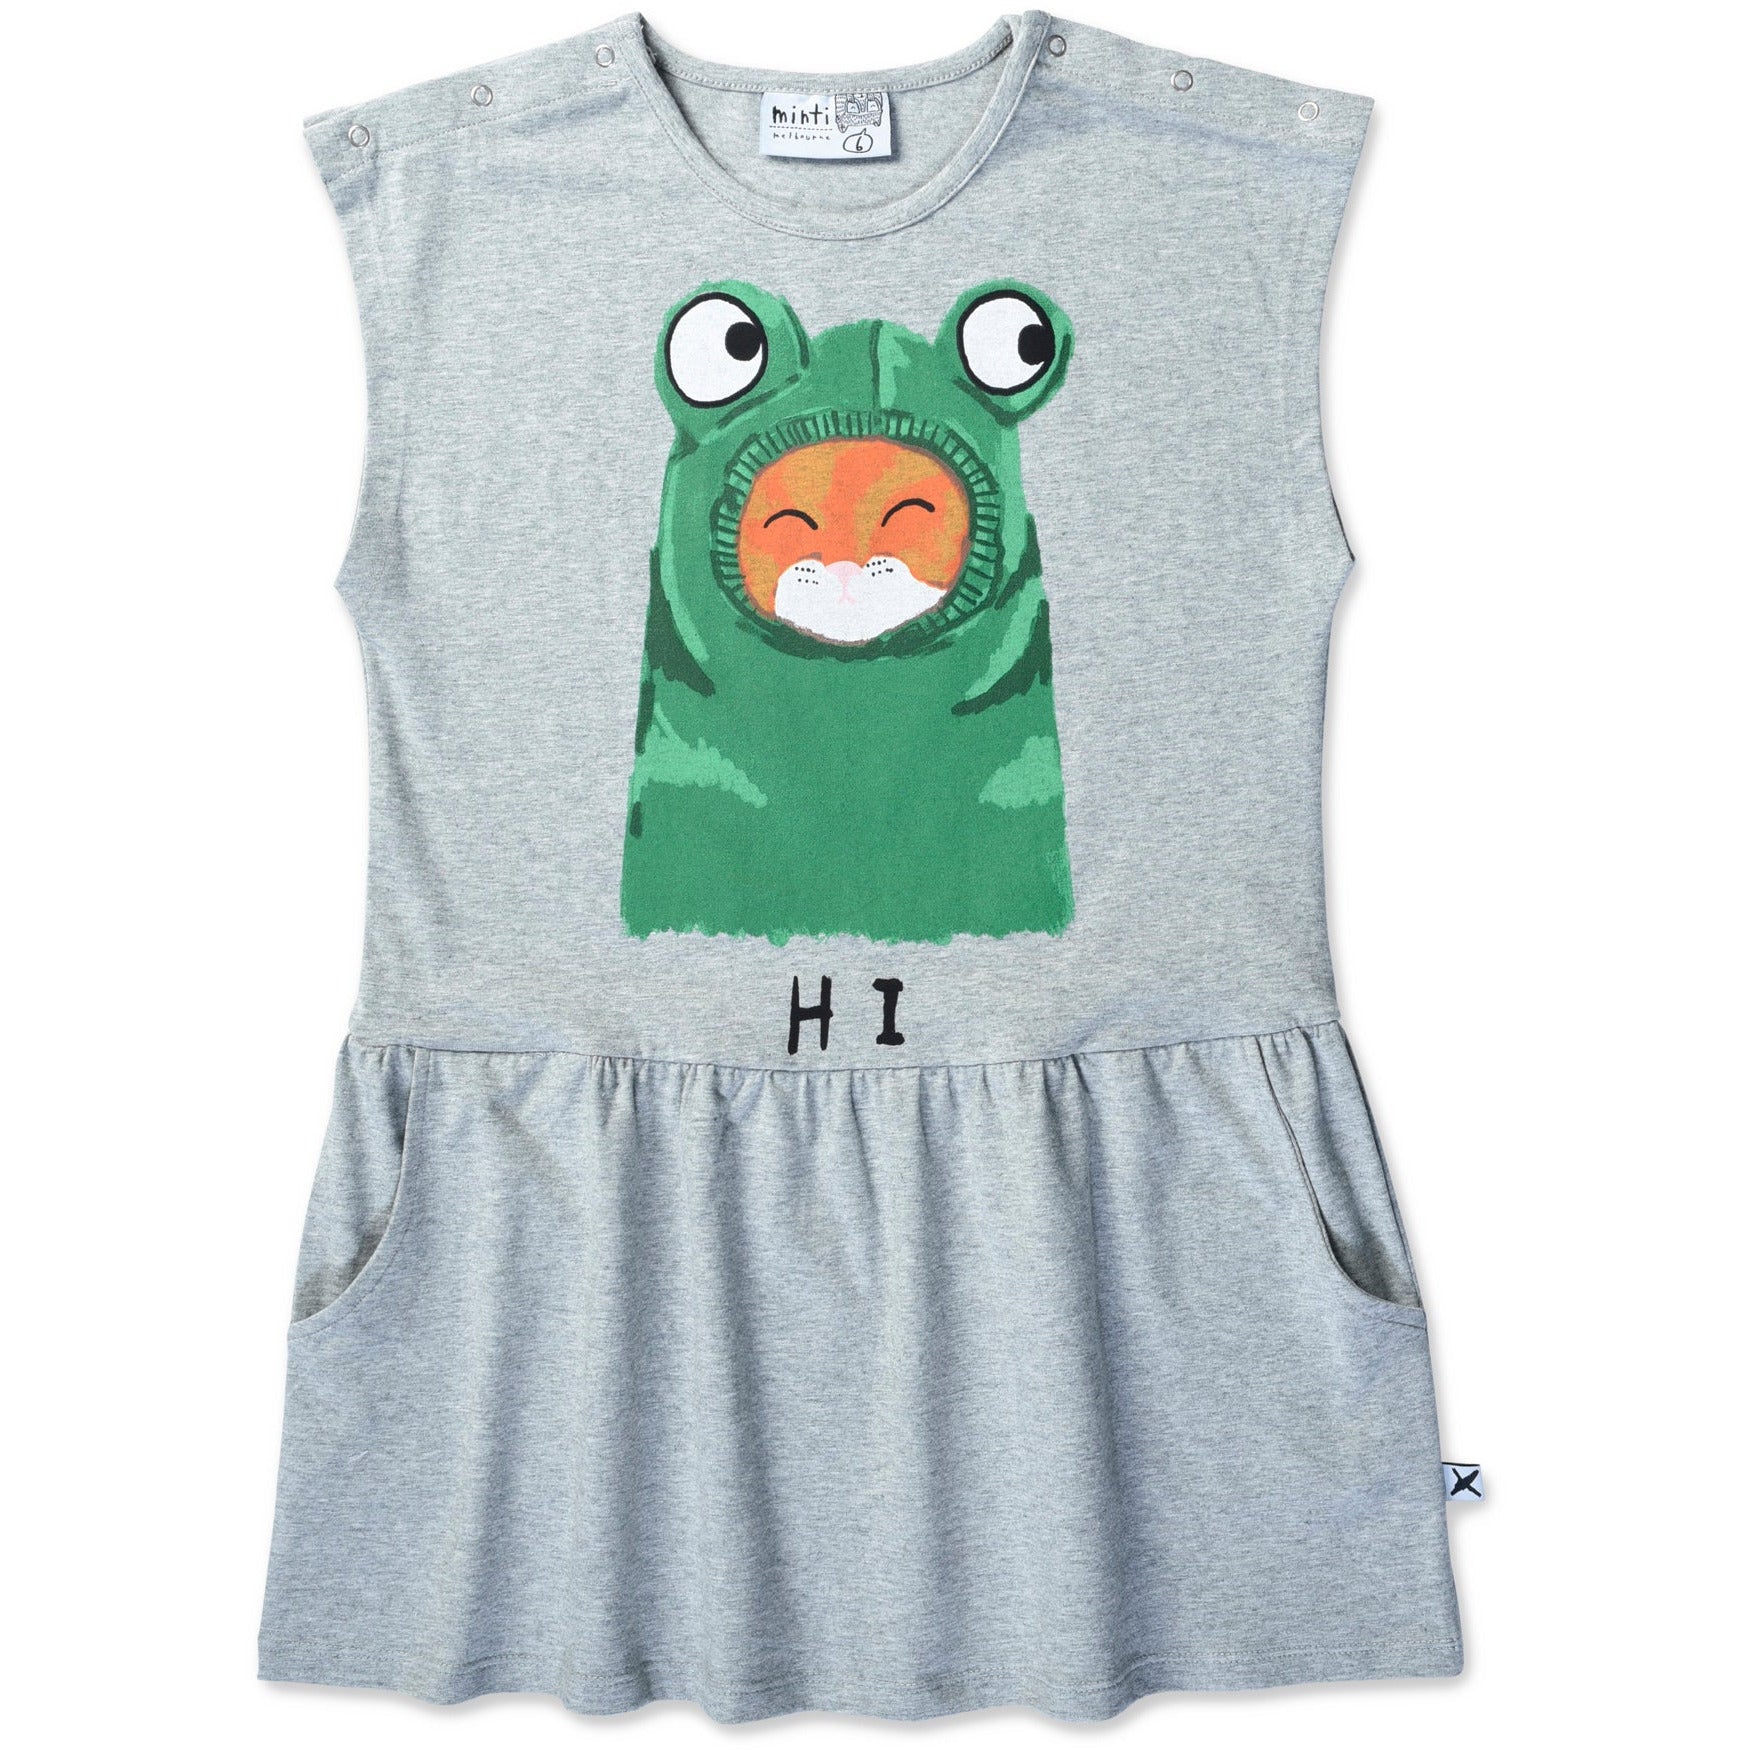 Pets In Disguise Dress - Grey Marle